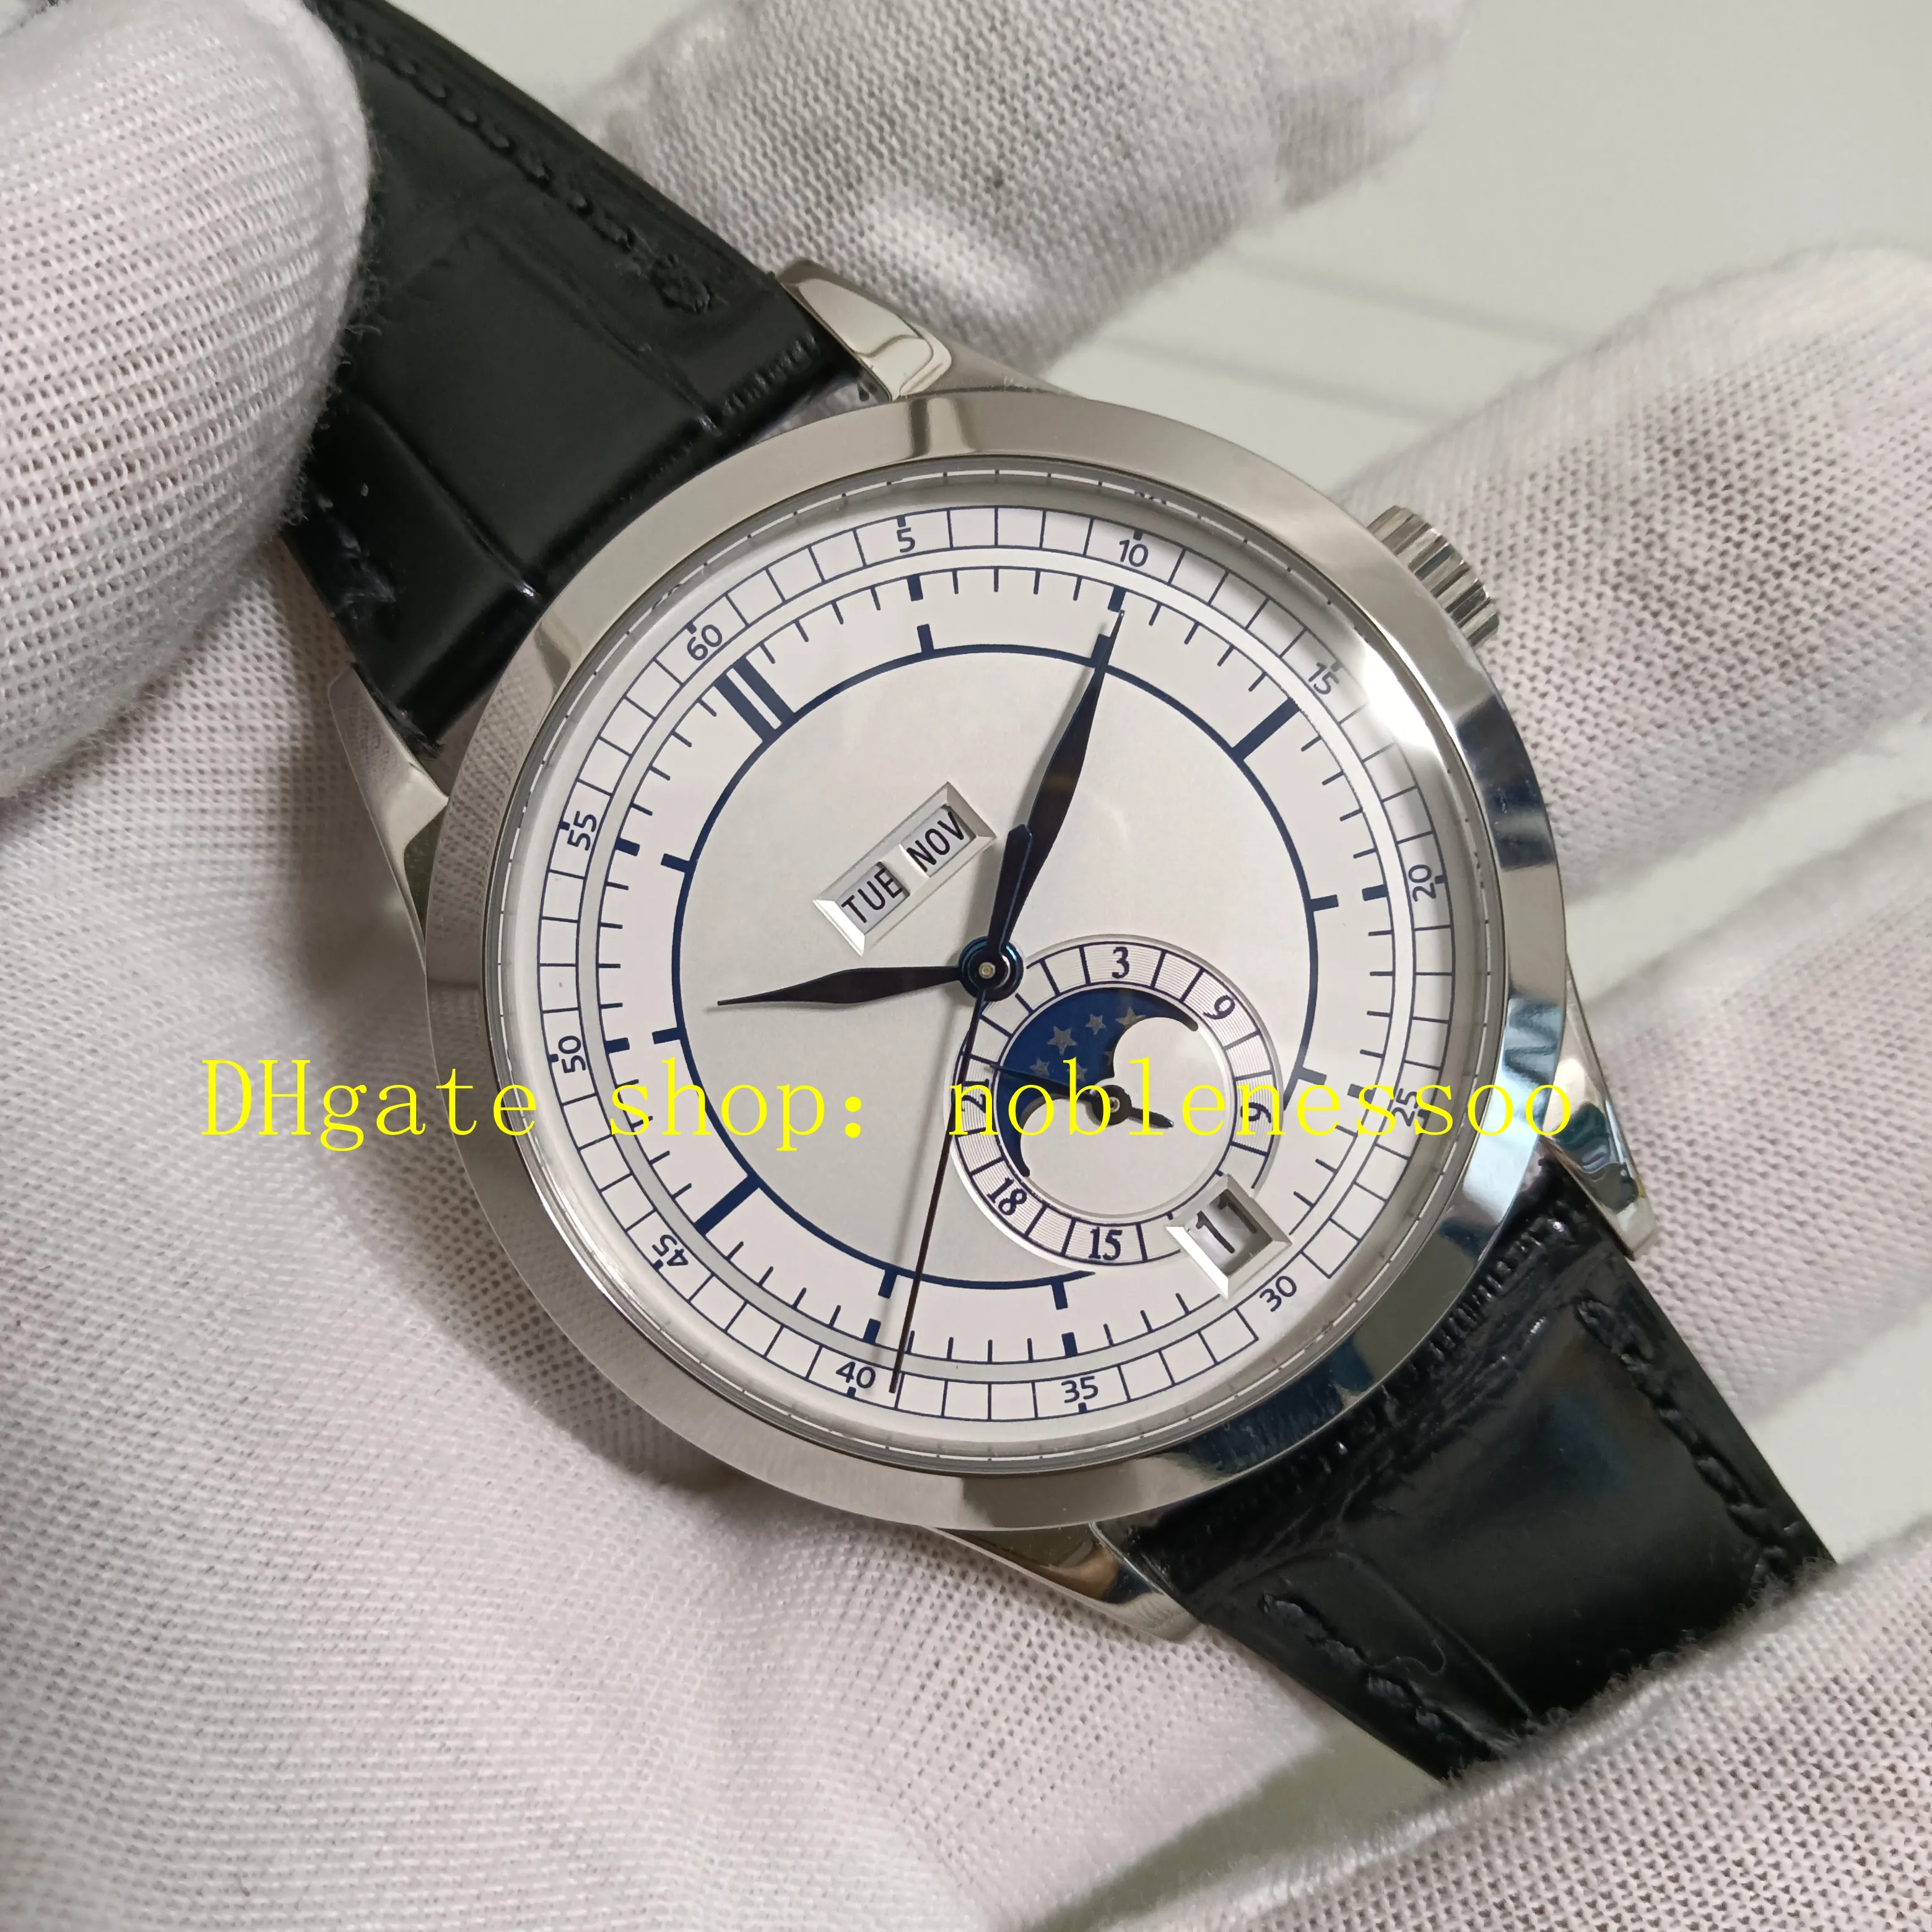 Super Annual Calendar Moon Watch Authentic Picture Mens White Dial Leather Strap 5396G KM Factory Cal.324 S QA LU 2 KMF Sport Automatic Mechanical Watches